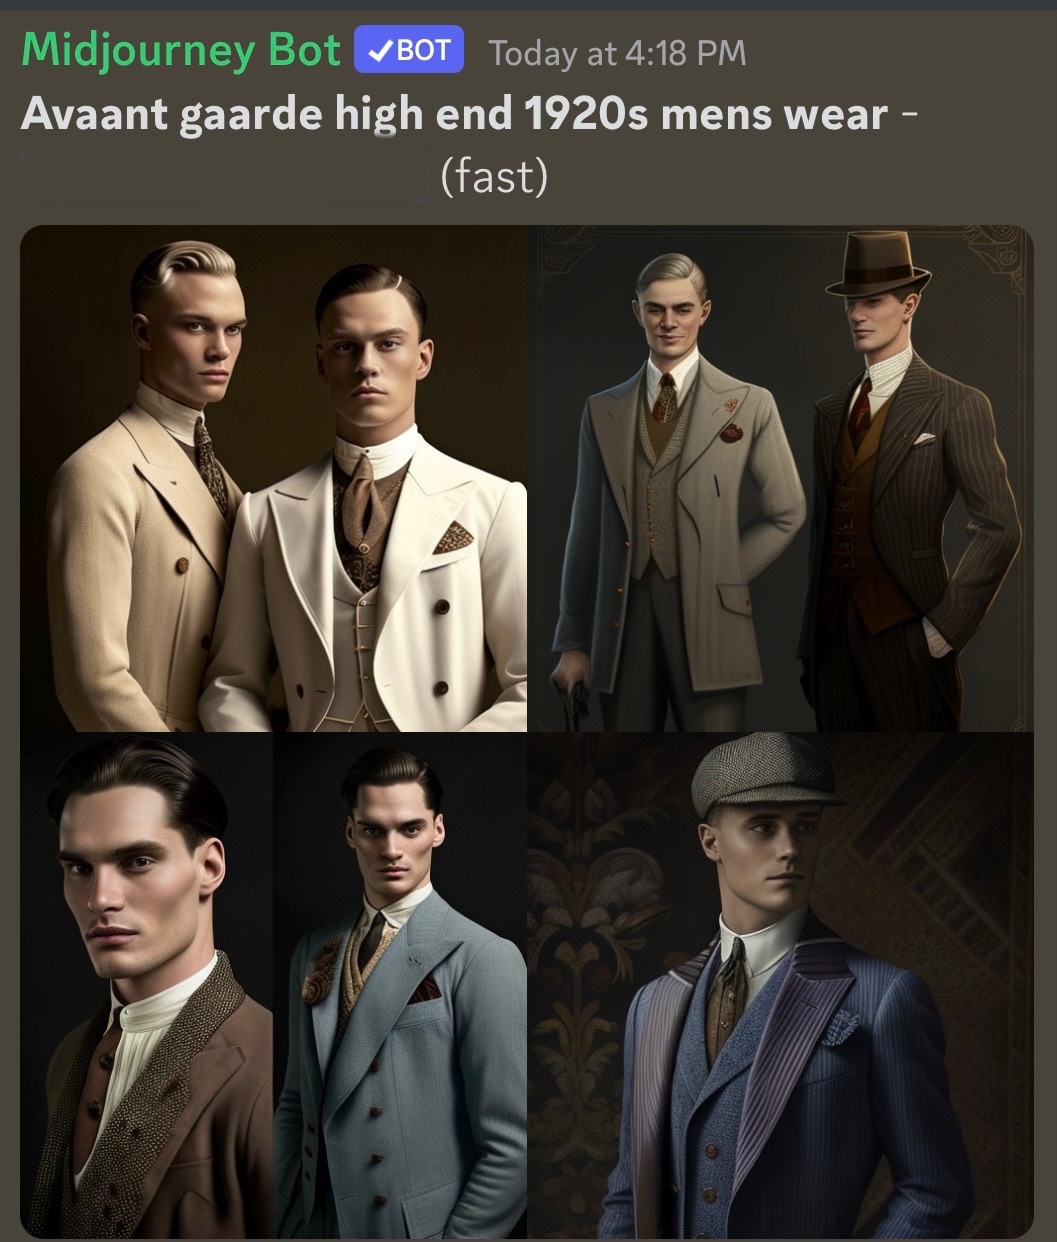 Midjourney Bot. Avaant gaarde high end 1920s mens wear - generated four different portraits of men in 1920s style mens wear including a all white men. Closeup of two men. One man in a tan suit, another in a white suit with brown tie. Another of two men, one in a gray suit another in a brown suit with a brown hat. A third portrait shows a closeup of a white man with high cheekbones in a brown suit and a man standing behind him in a light gray suit. A fourth shows a white man in a purple and blue suit with a gray newsboy hat.